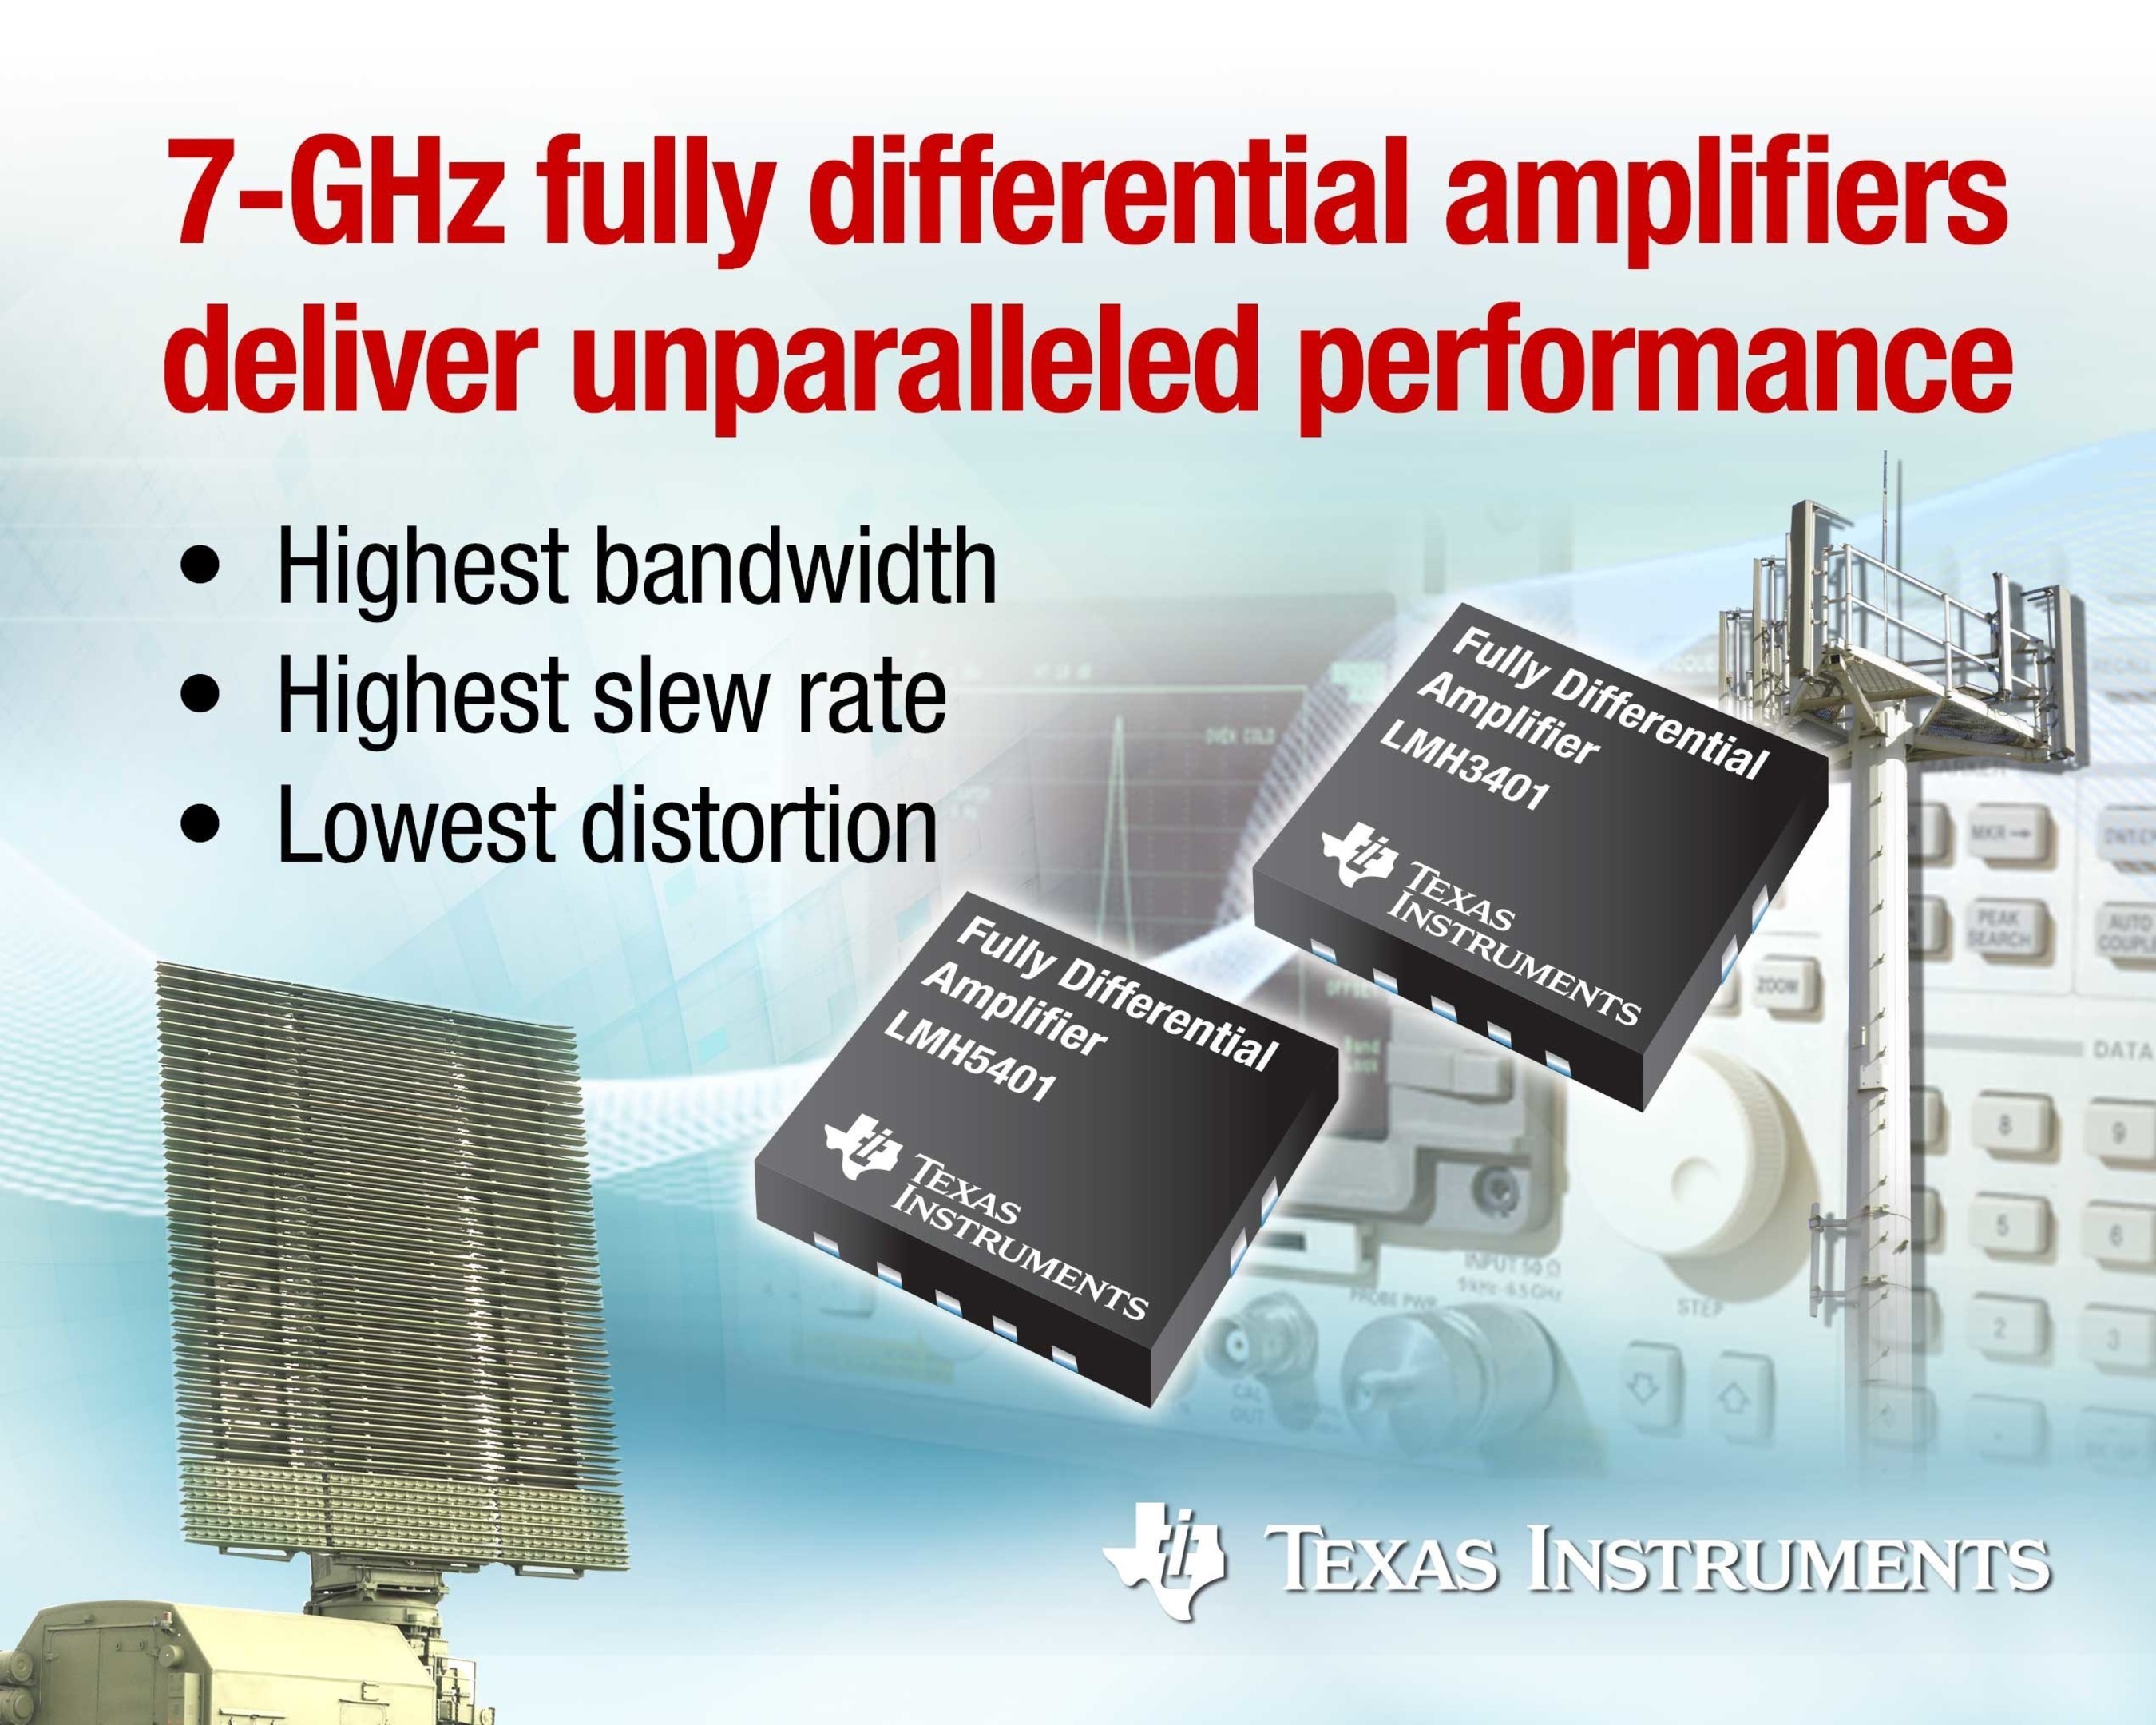 Texas Instruments today announced two new fully differential amplifiers (FDAs) that provide DC-coupled applications with best-in-class AC performance to improve system capabilities and performance. The LMH3401 and LMH5401 FDAs provide higher bandwidth and slew rate, and lower distortion than existing ADC drivers. The performance of the LMH3401 and LMH5401 can enable radar systems that help keep populations safer and wireless base stations that drop fewer calls, while providing faster upload speeds. For more information about the LMH3401 and LMH5401, visit www.ti.com/lmh3401-pr.